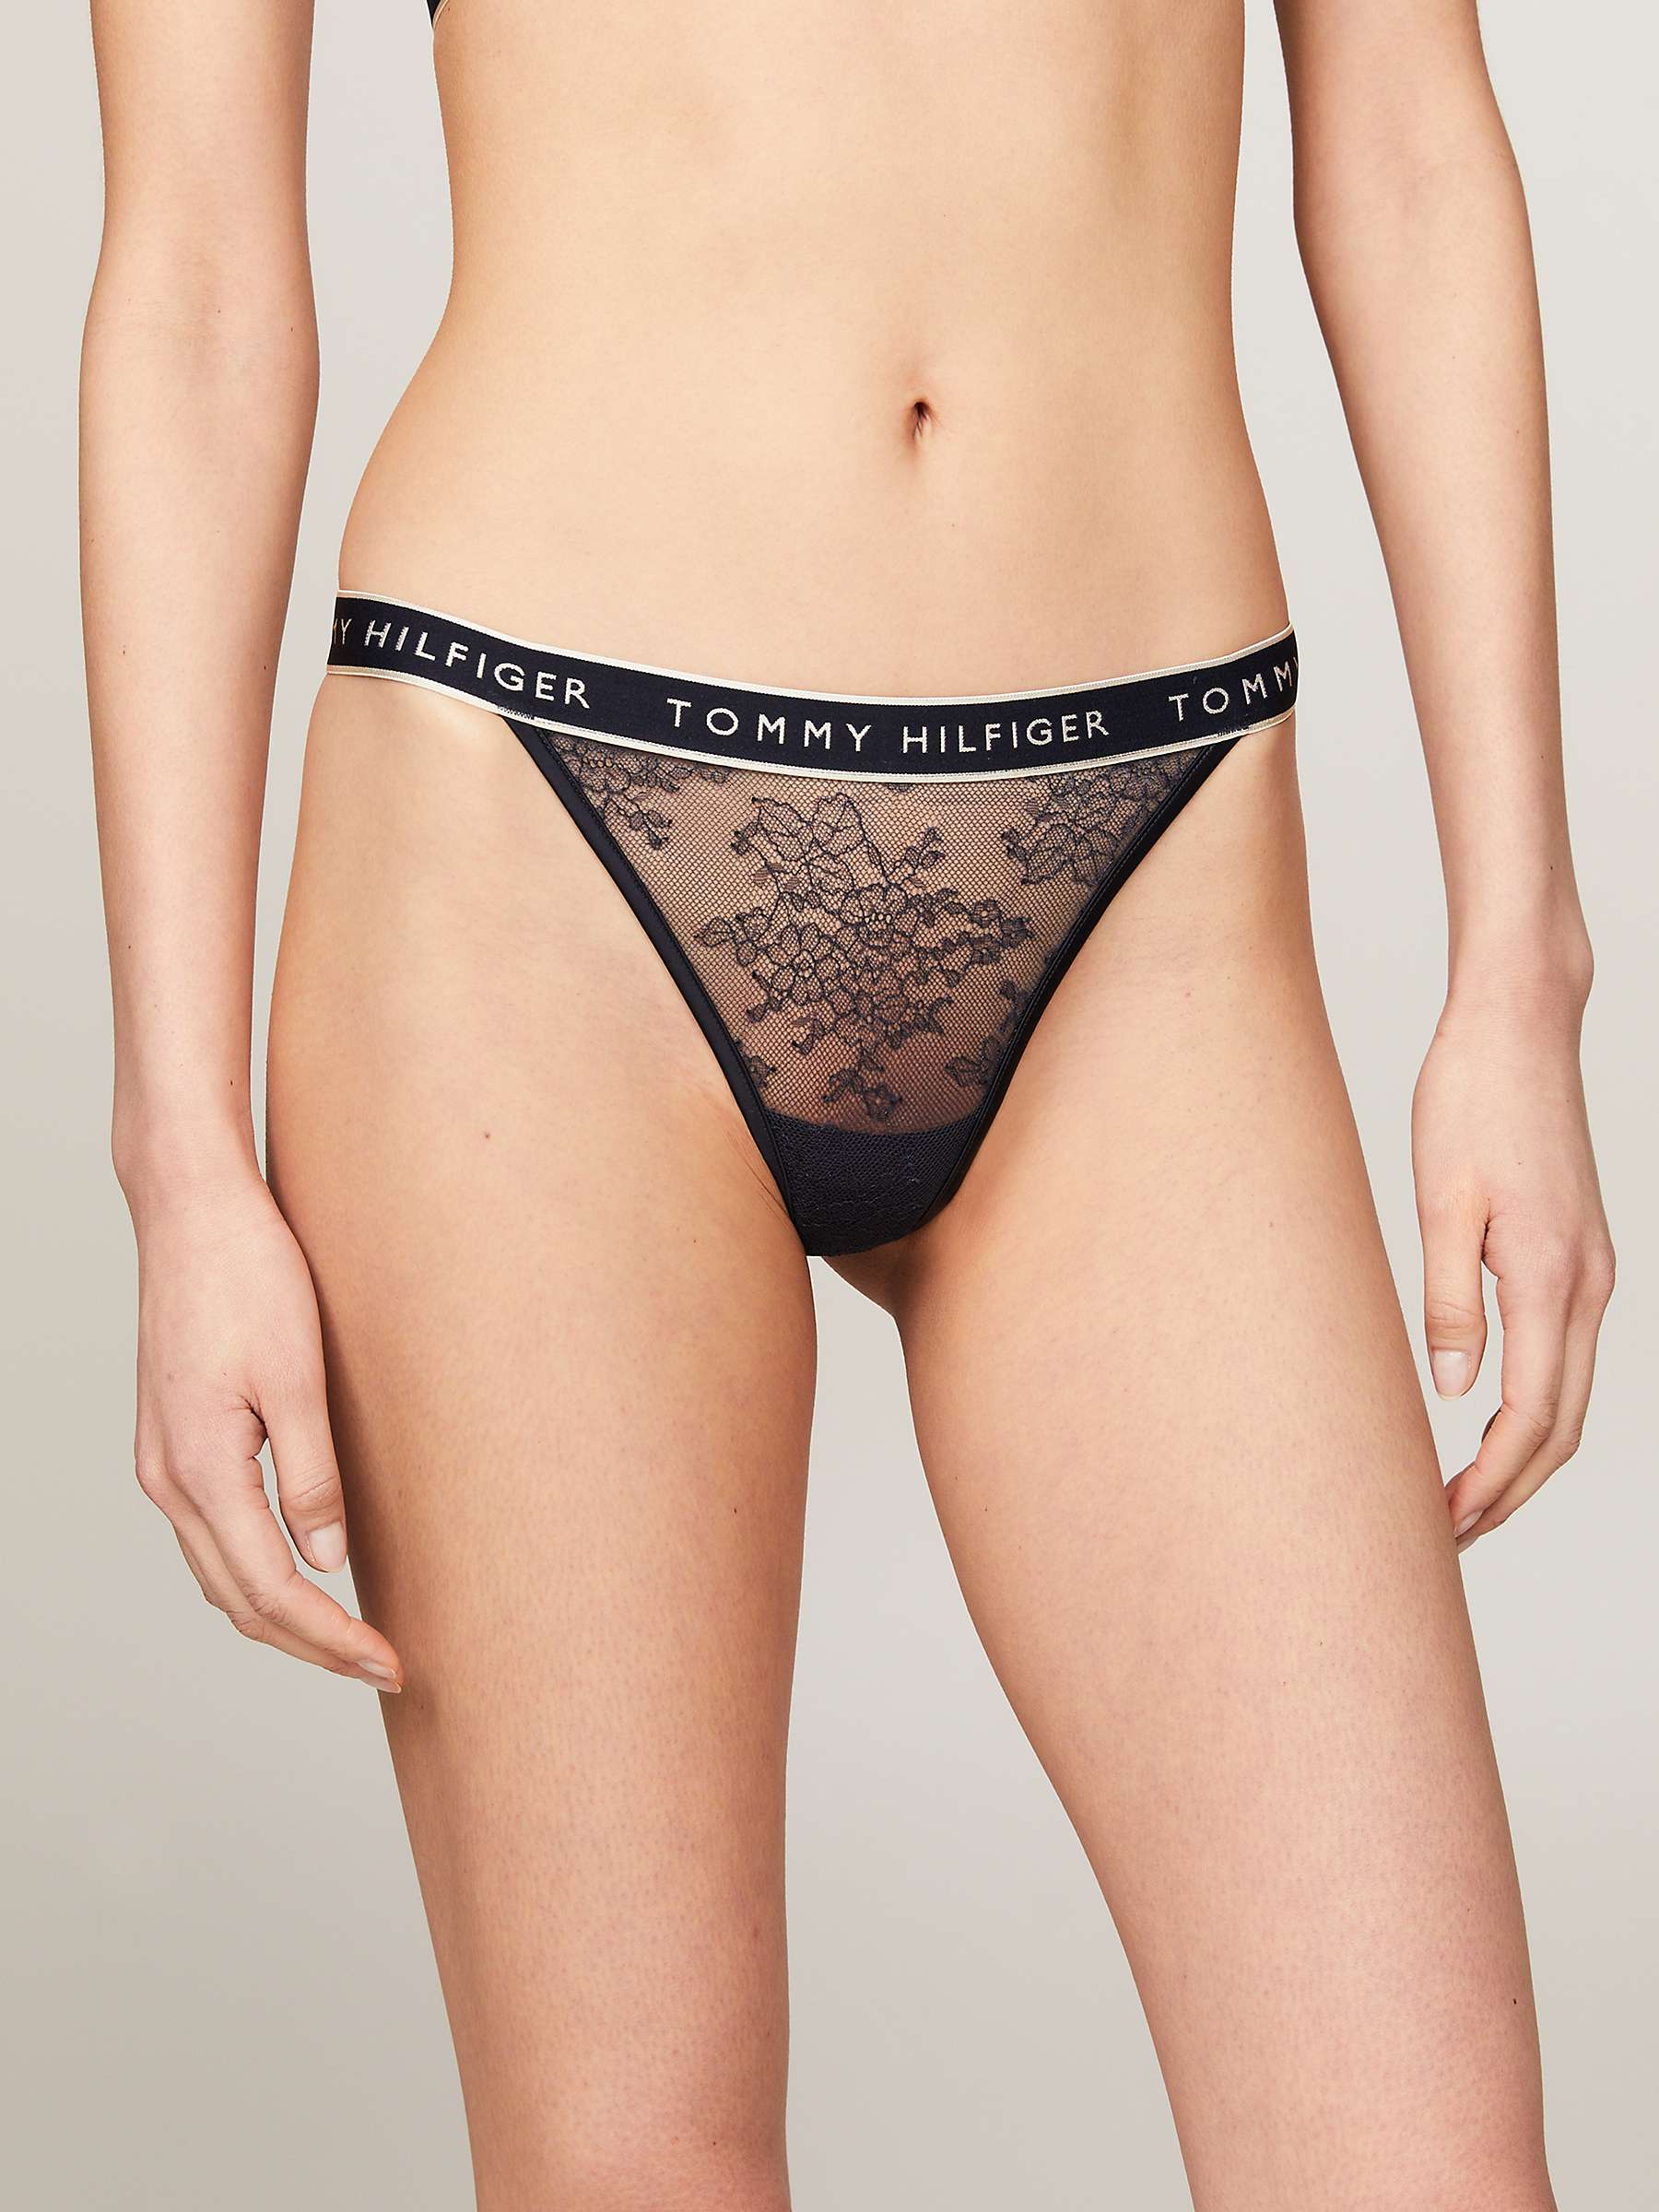 Buy Tommy Hilfiger Lace Tanga Knickers, Desert Sky Online at johnlewis.com